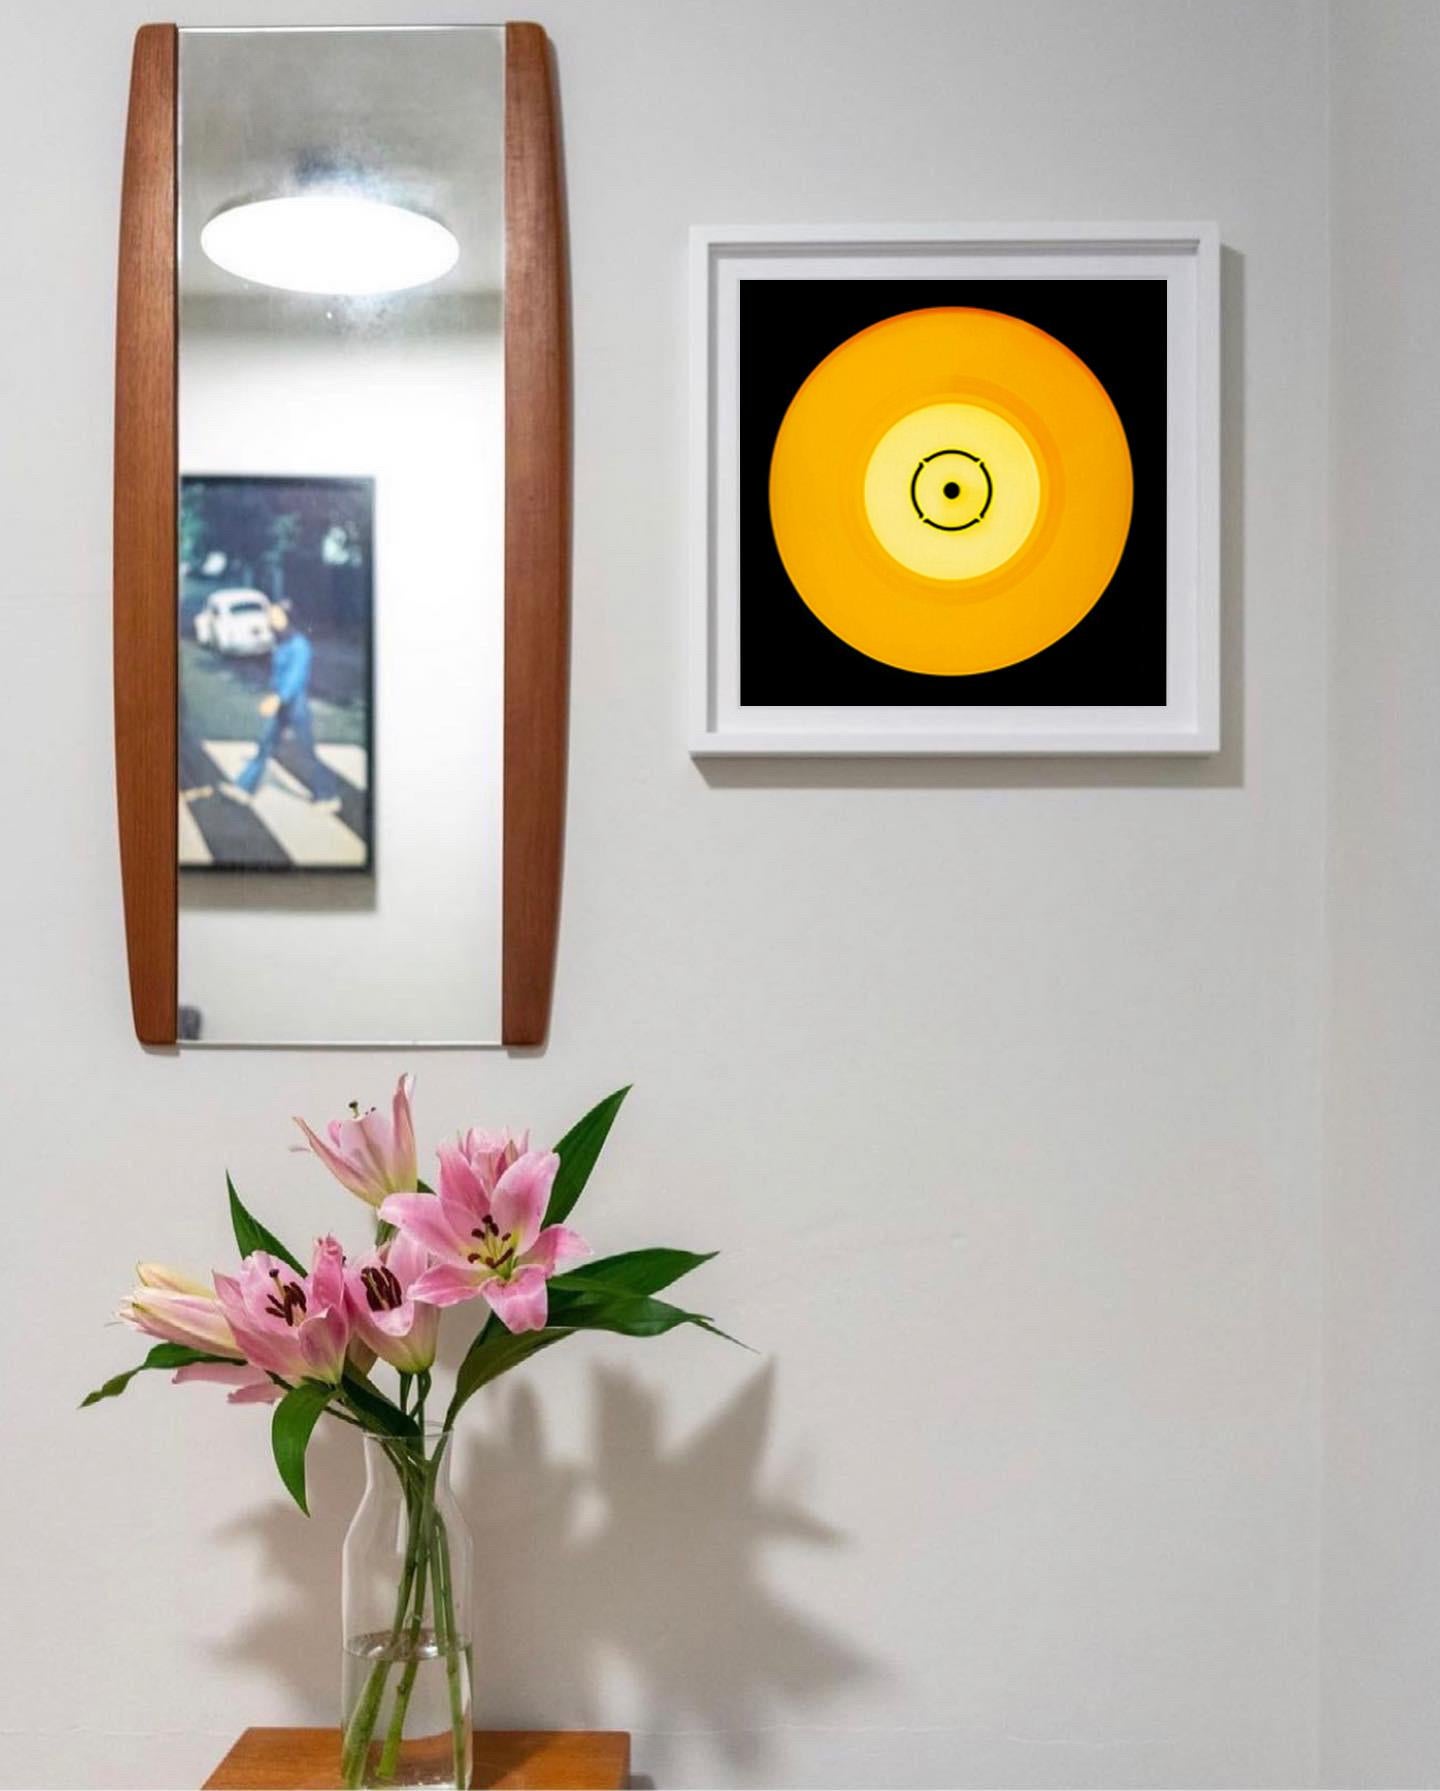 'Double B Side Sunshine' from the Heidler & Heeps Vinyl Collection.
Acclaimed contemporary photographers, Richard Heeps and Natasha Heidler have collaborated to make this beautifully mesmerising collection. A celebration of the vinyl record and